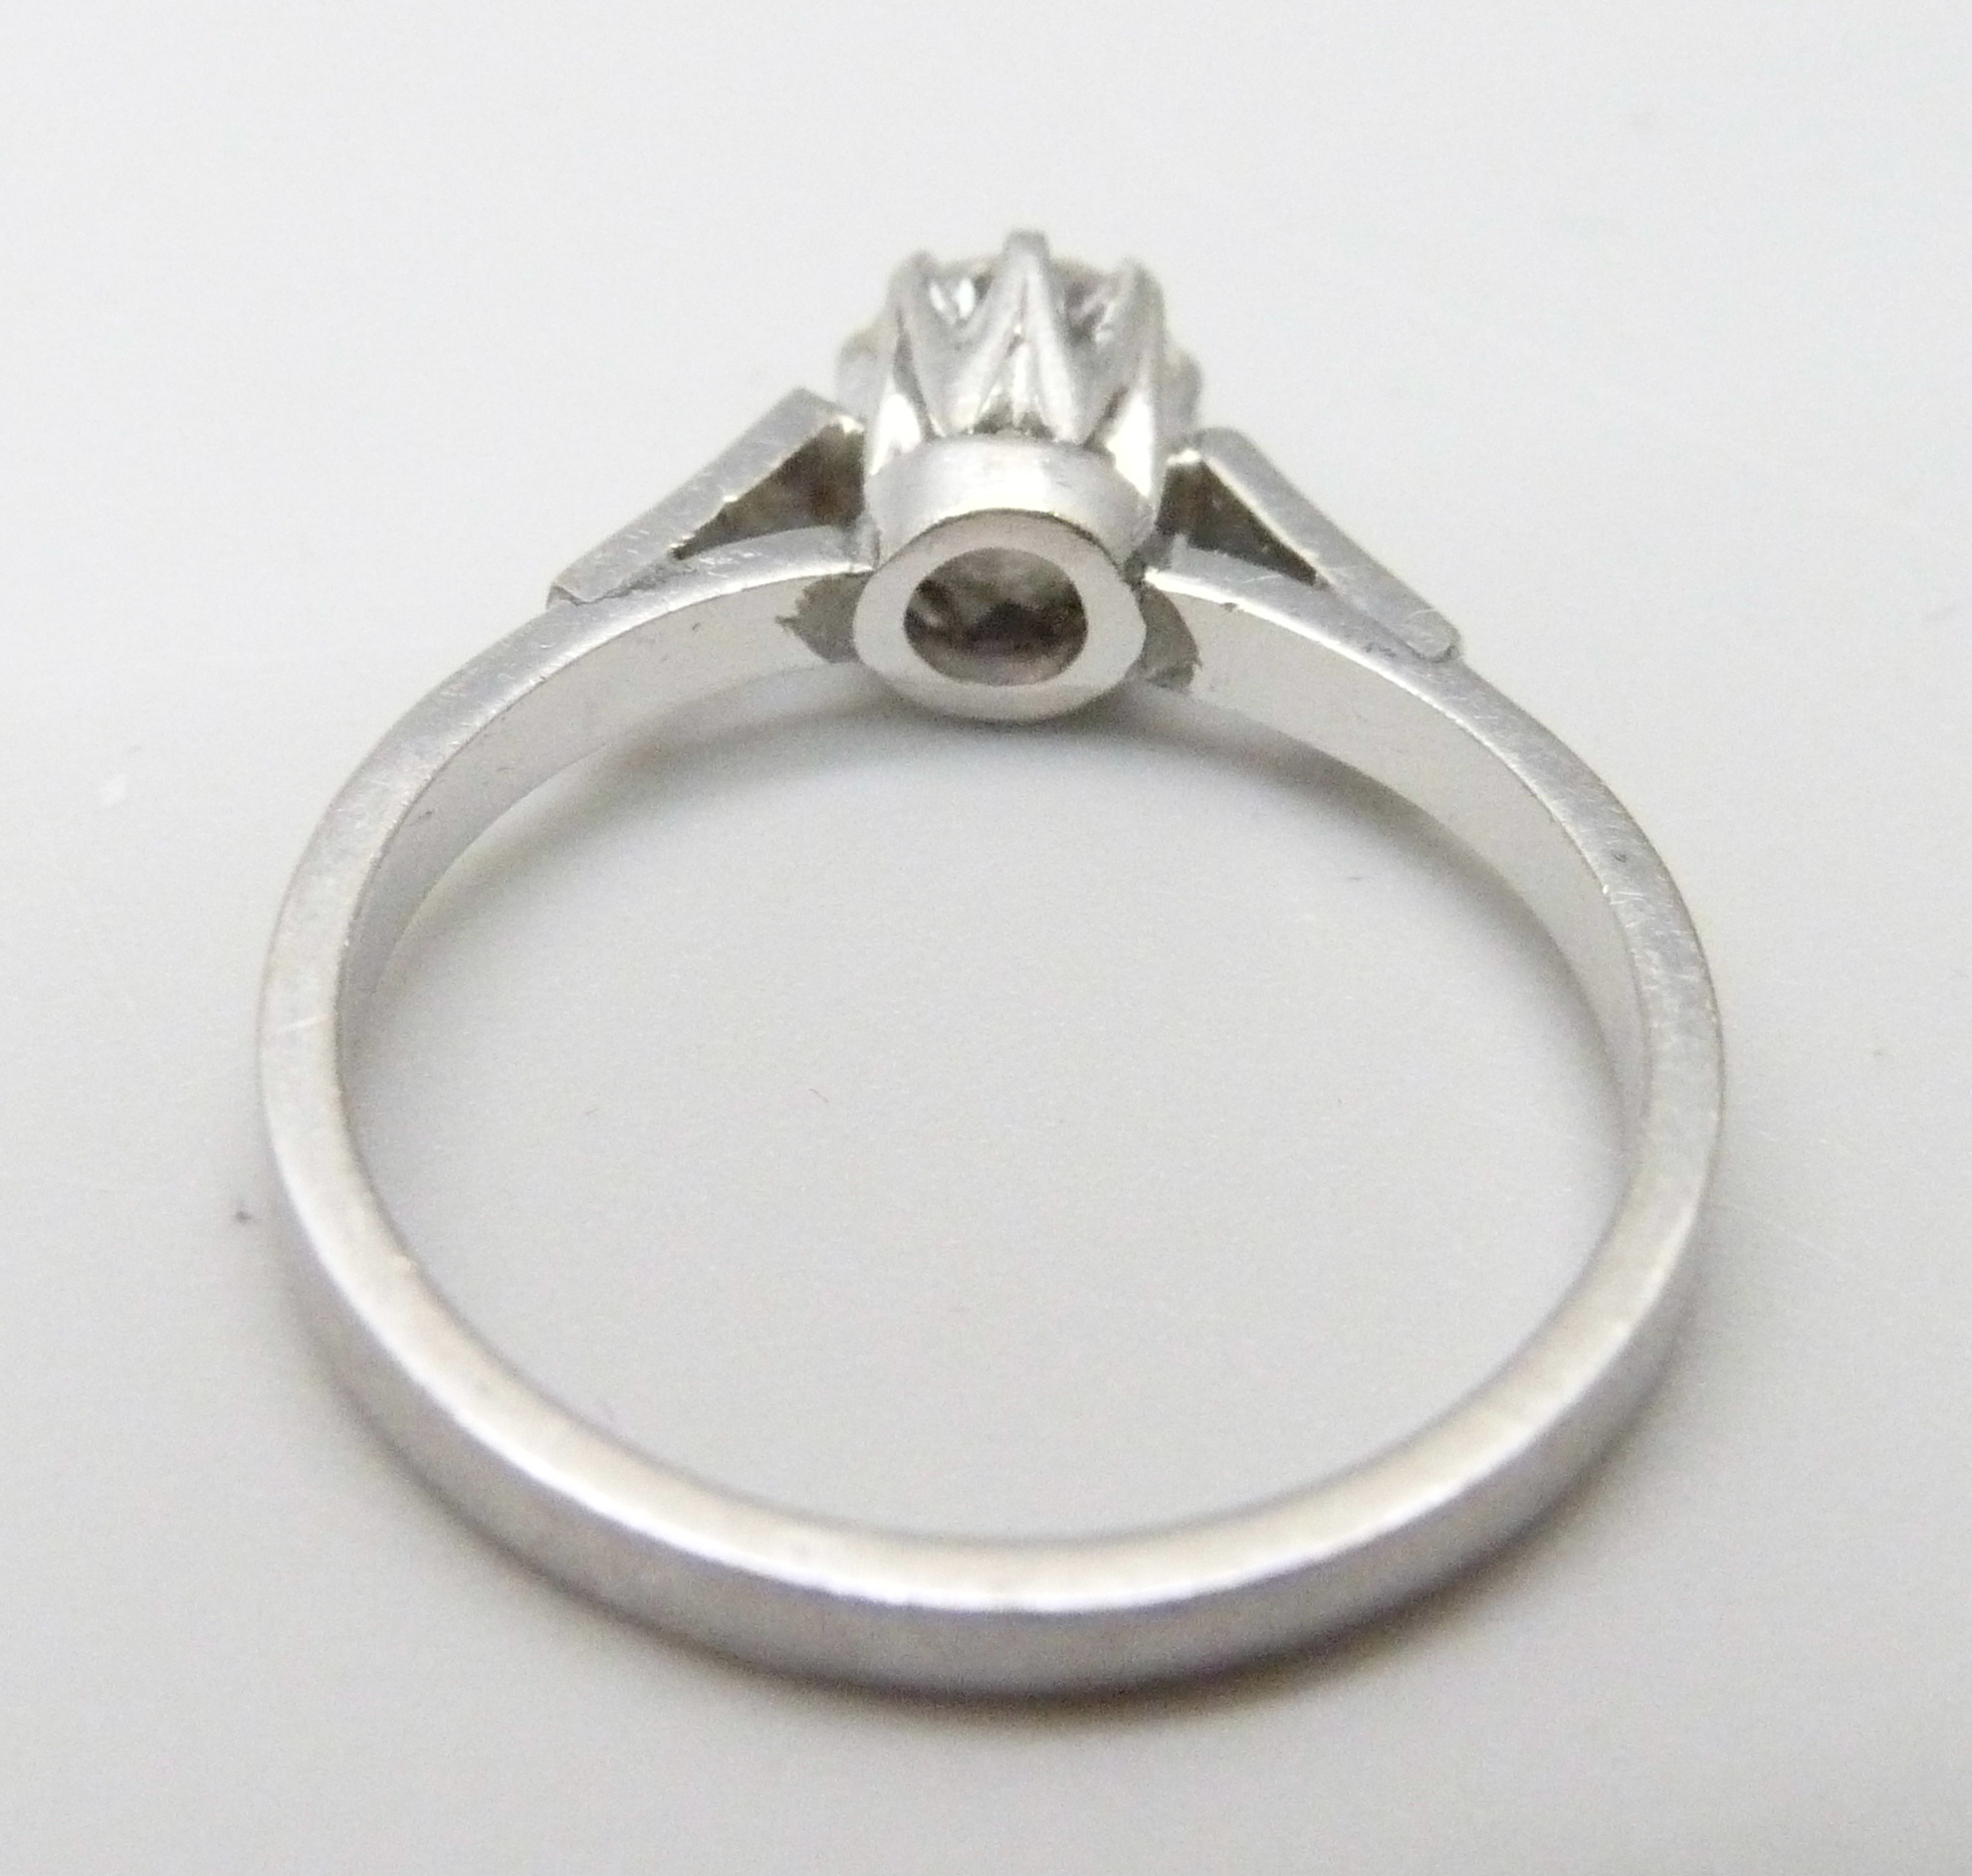 A platinum and diamond solitaire ring, 4.6g, P, approximately 0.5ct diamond weight - Image 3 of 3